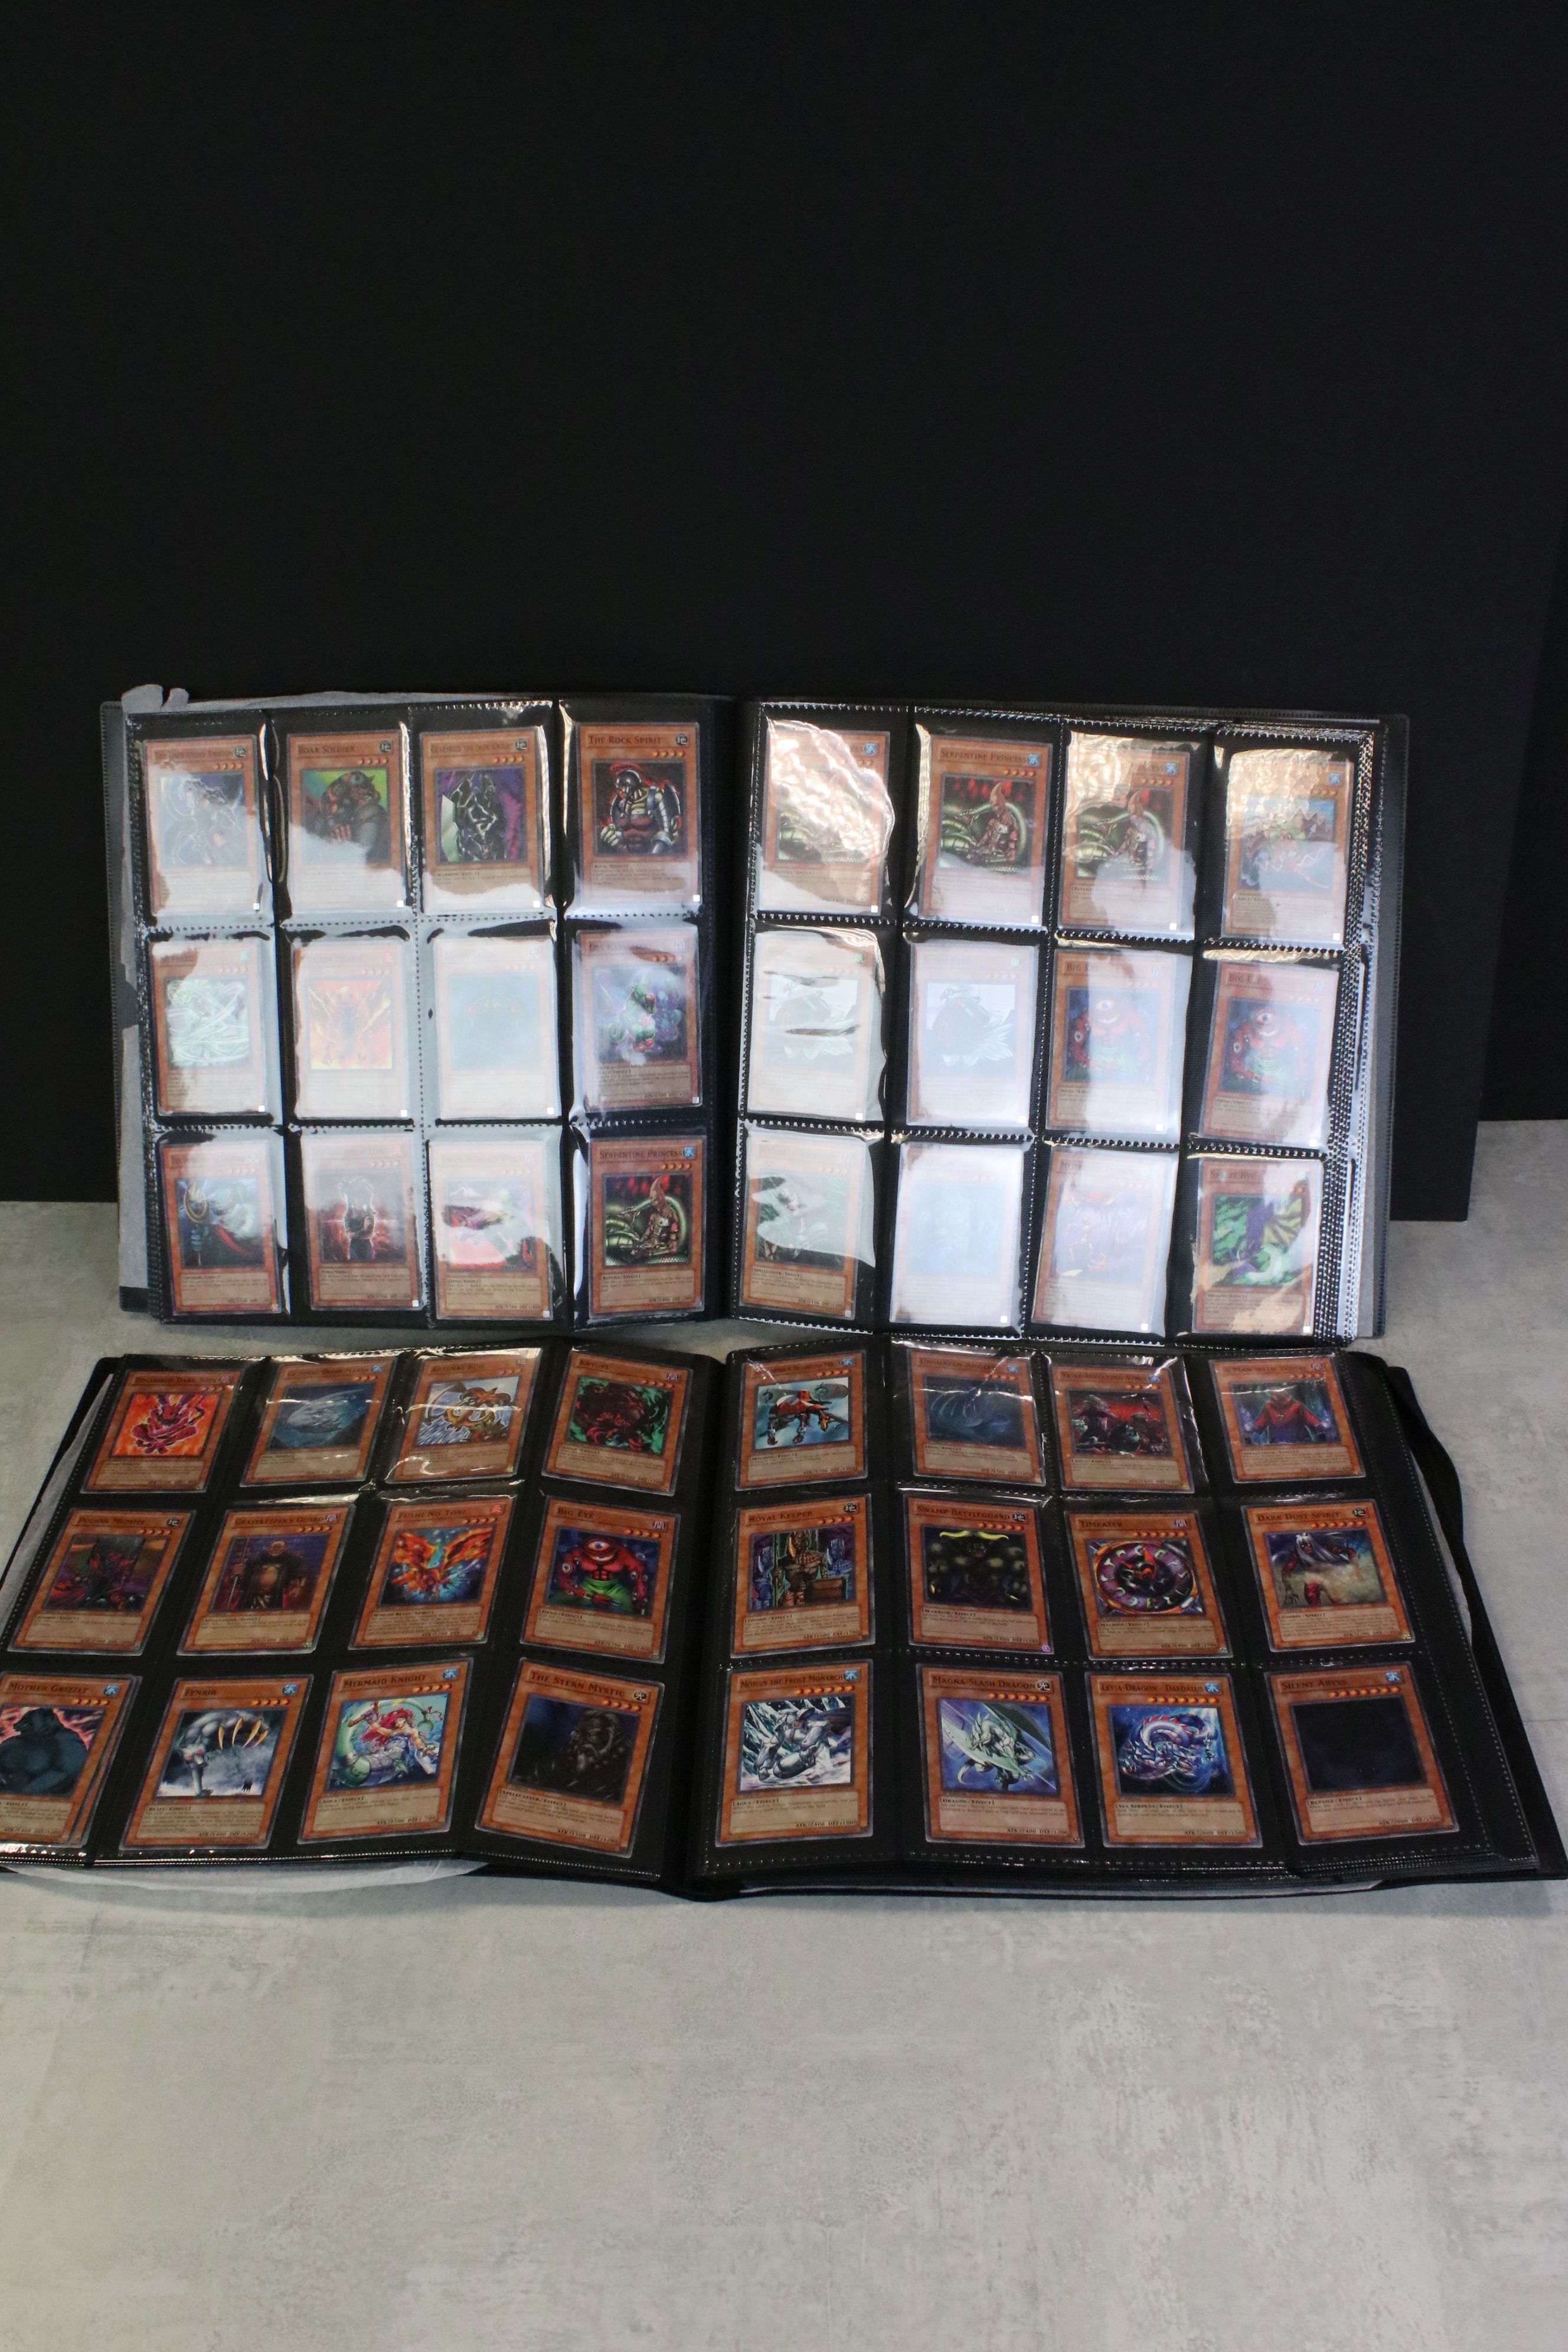 Yu-Gi-Oh! - Around 350 Yu-Gi-Oh! cards featuring common,1st, rare, holofoil rare, etc to include Des